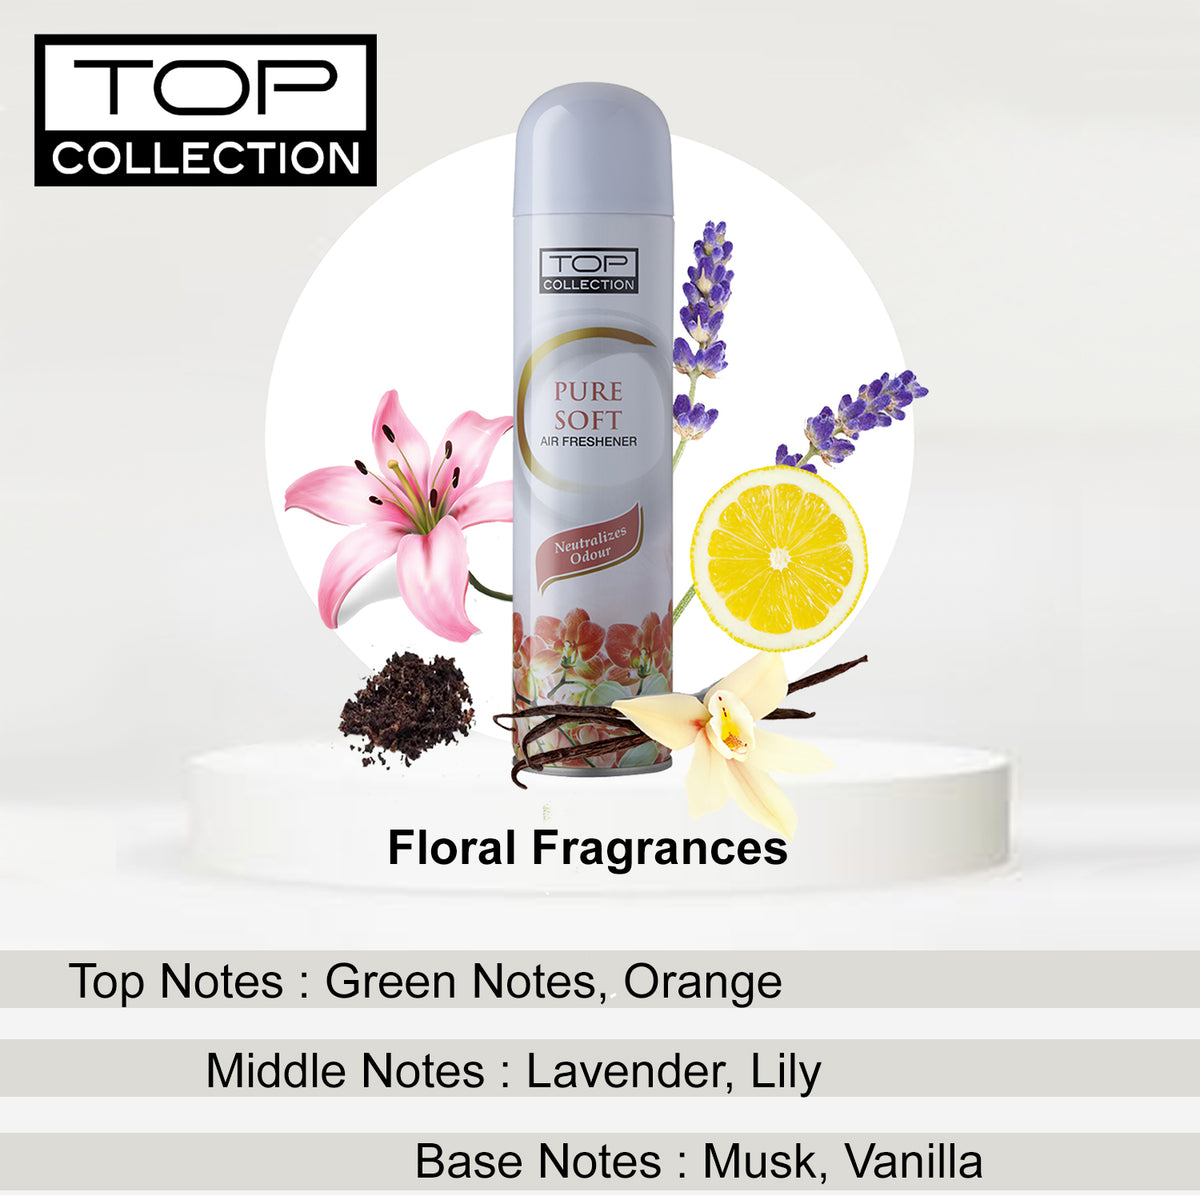 Top Collection Air Freshener - Pure Soft, 300ml